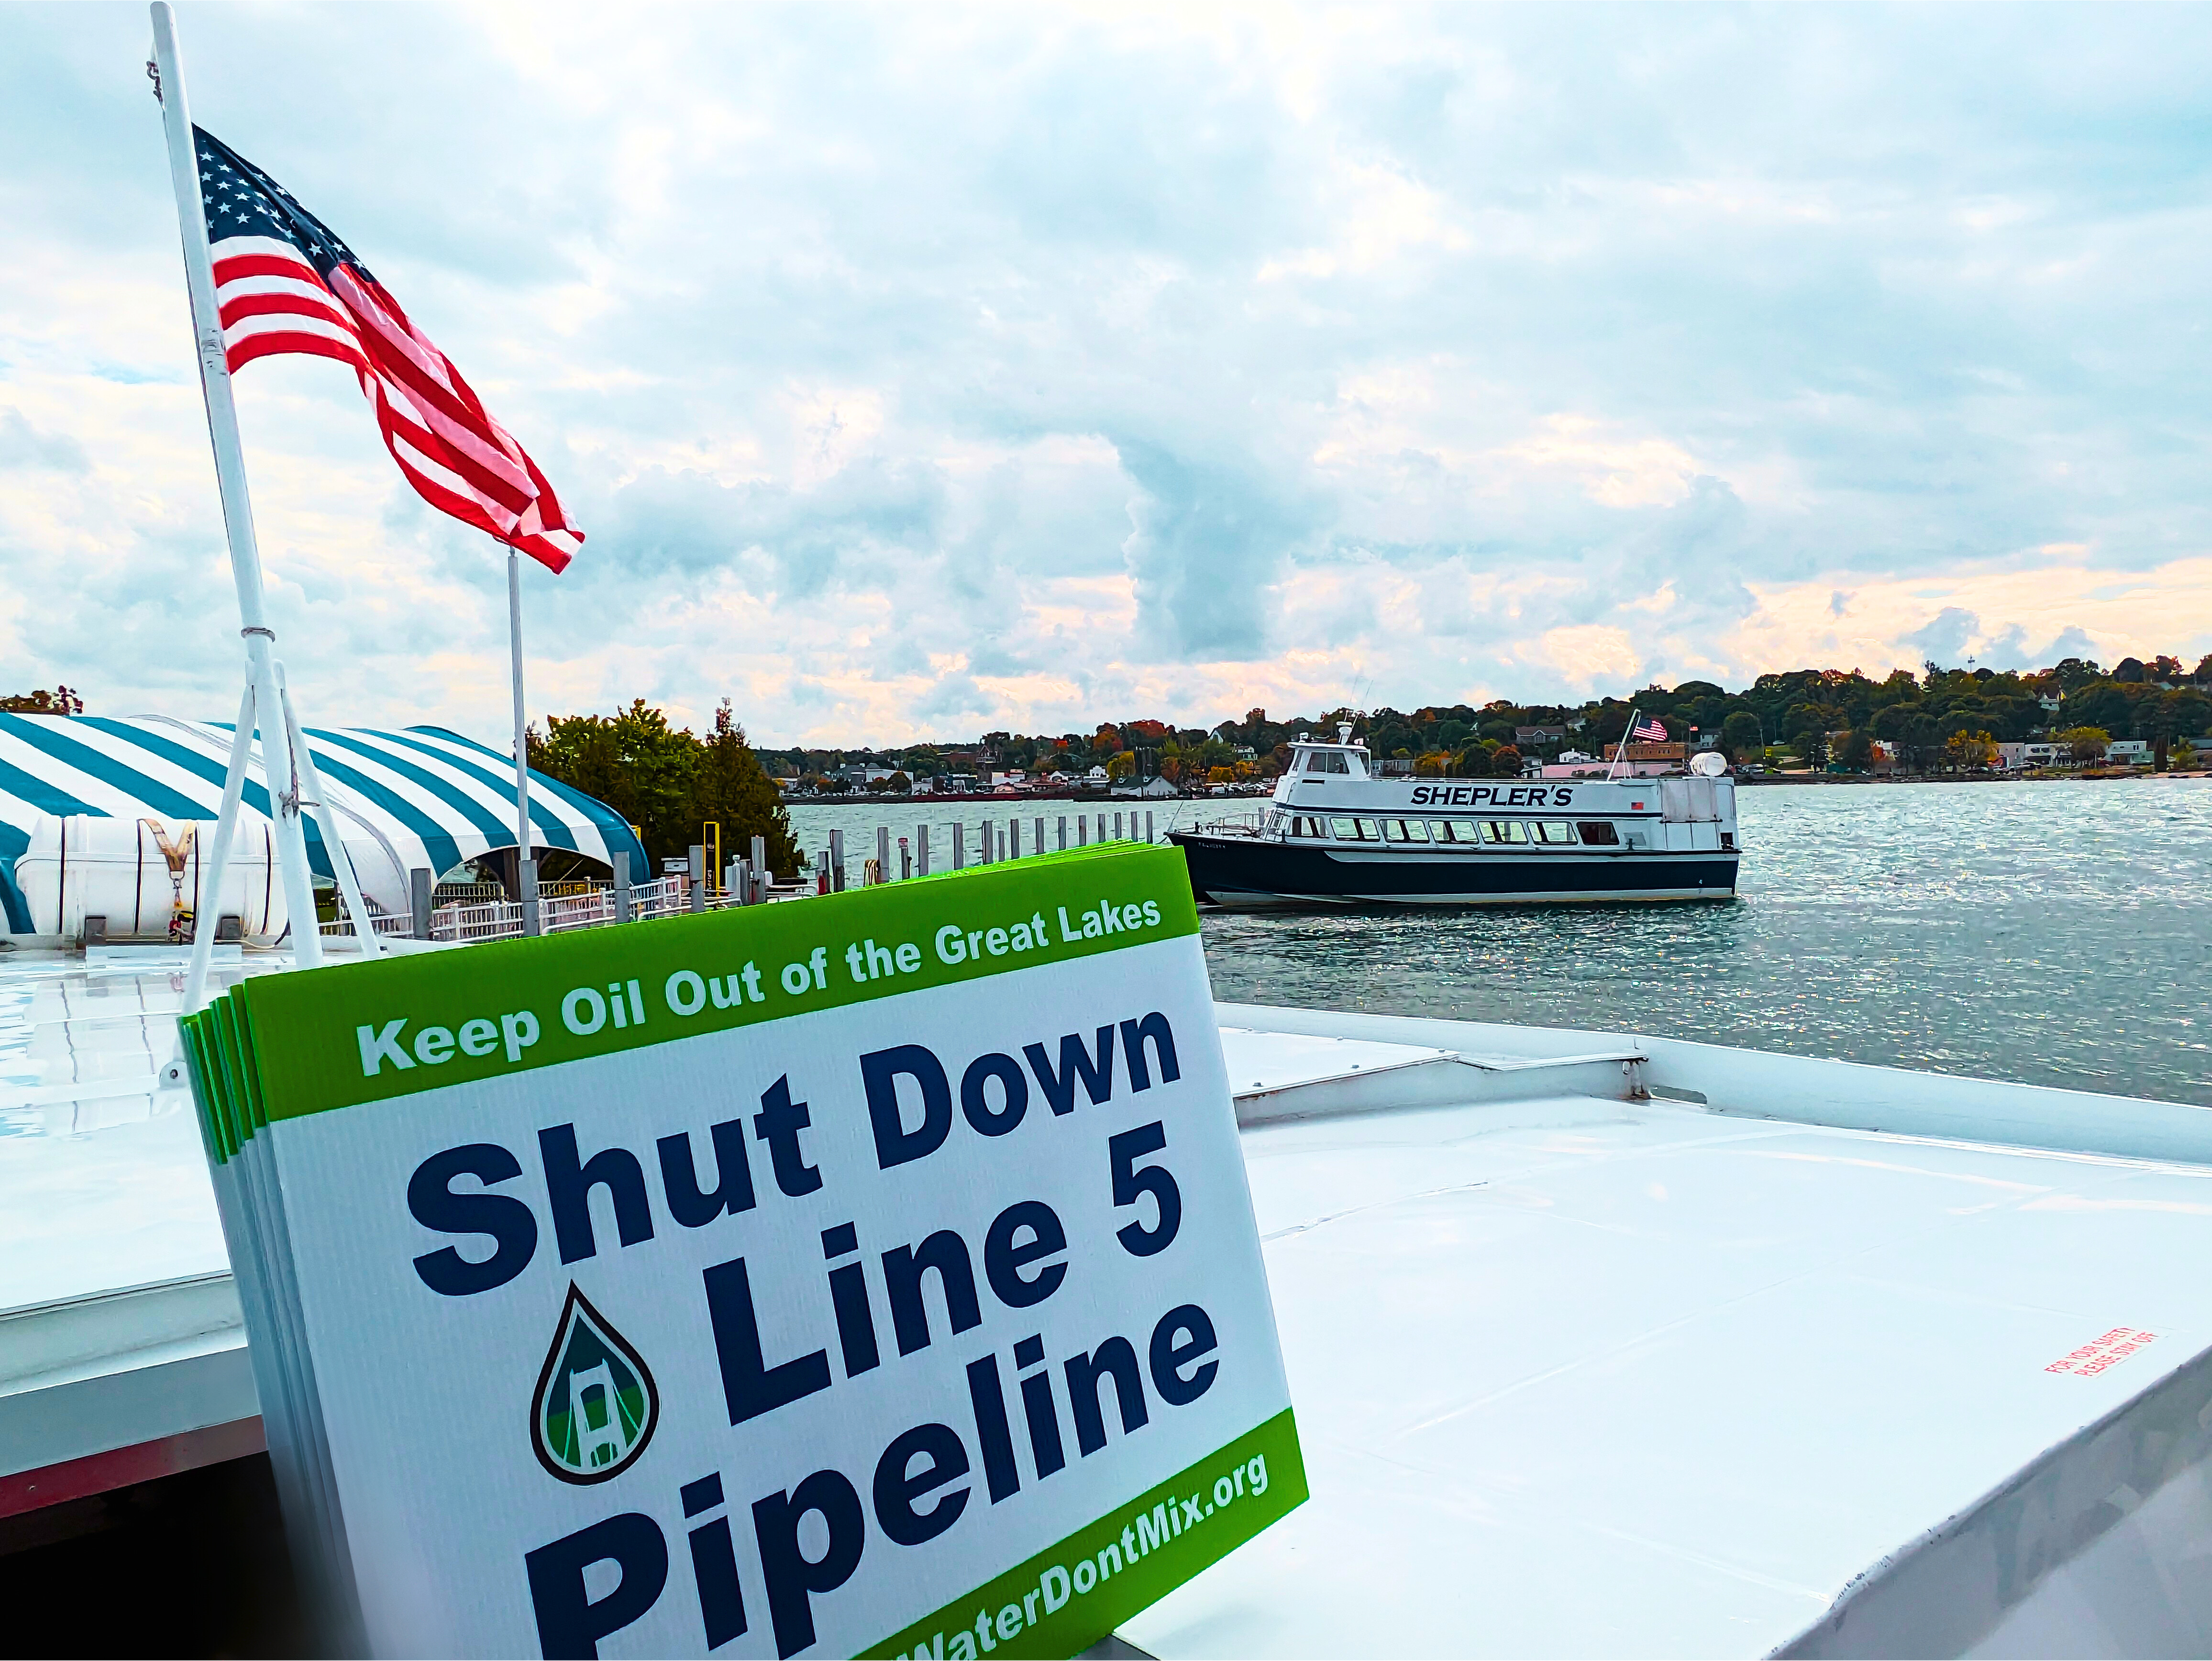 Shut Down Line 5 Pipeline sign held on a boat in the Mackinac Straits between Lake Michigan and Lake Huron